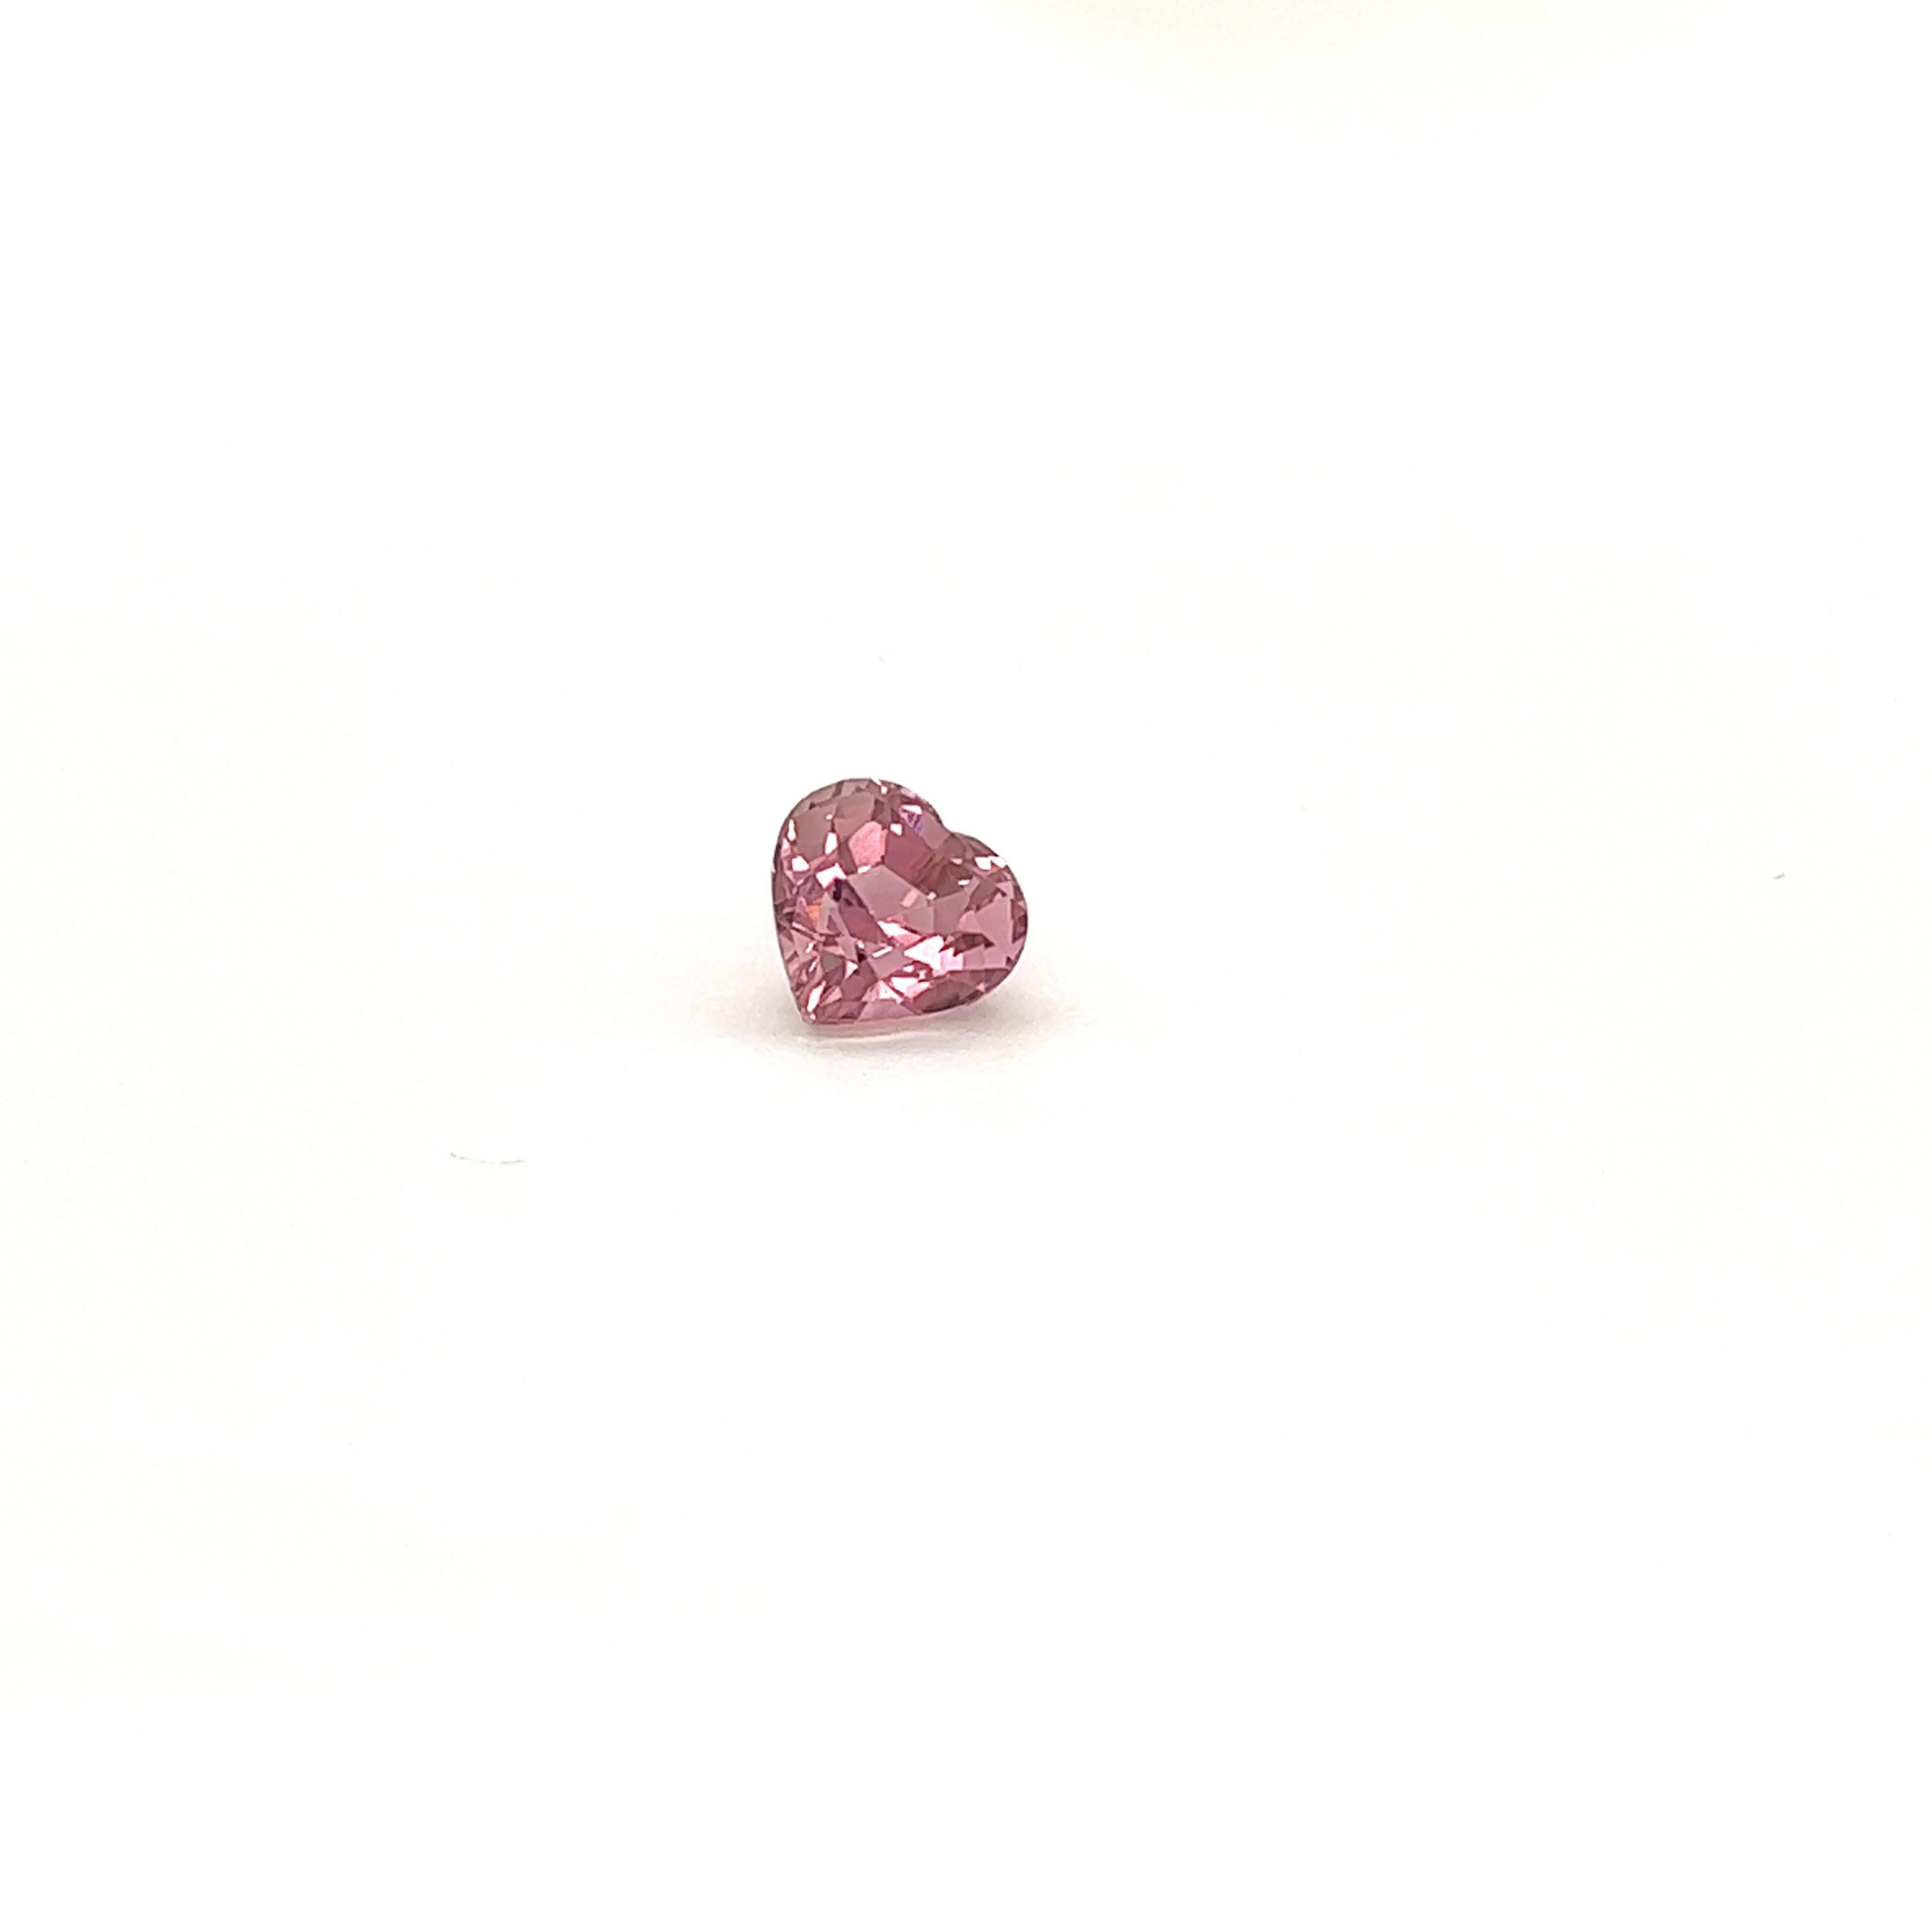 
Pink hearts please! These pink hearts adore so gorgeous and come in so many hues of pink, from blush pink to dusty pink to a deeper pink! Let us know if you’re interested and we can send more images and design a price you love such as earrings,